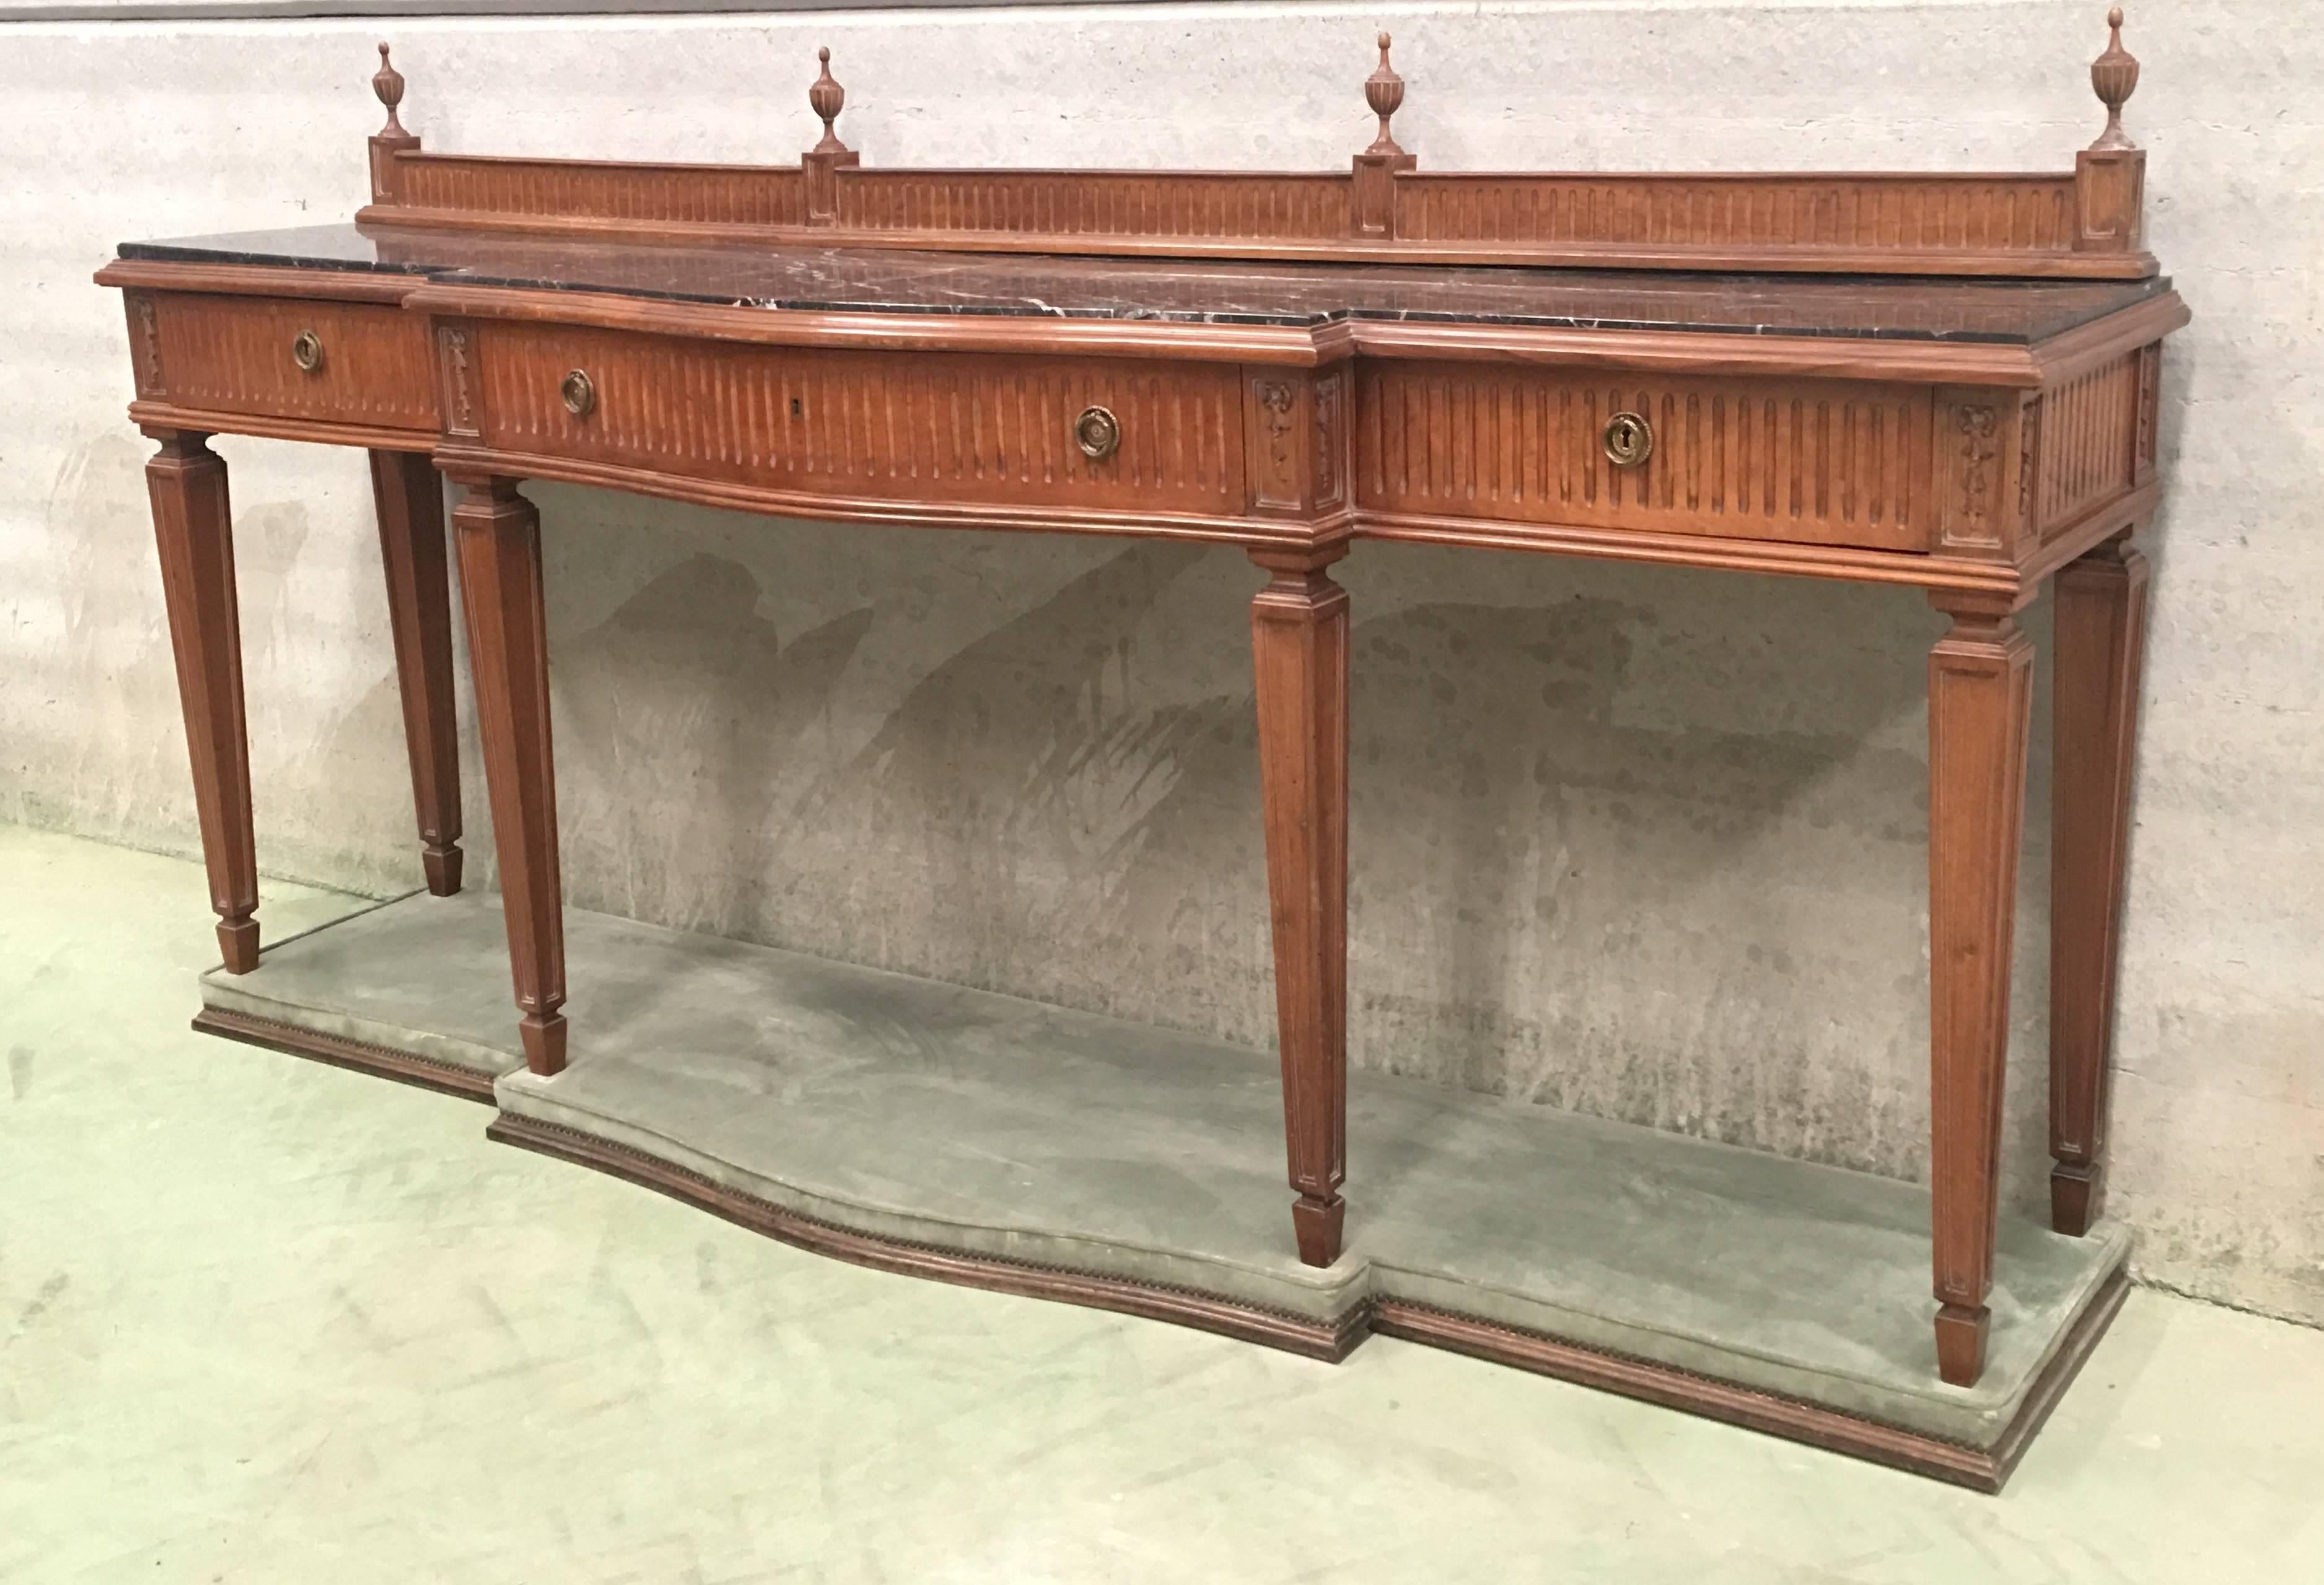 20th century Louis XVI Style Neoclassical Console Table with Three Drawers In Good Condition For Sale In Miami, FL